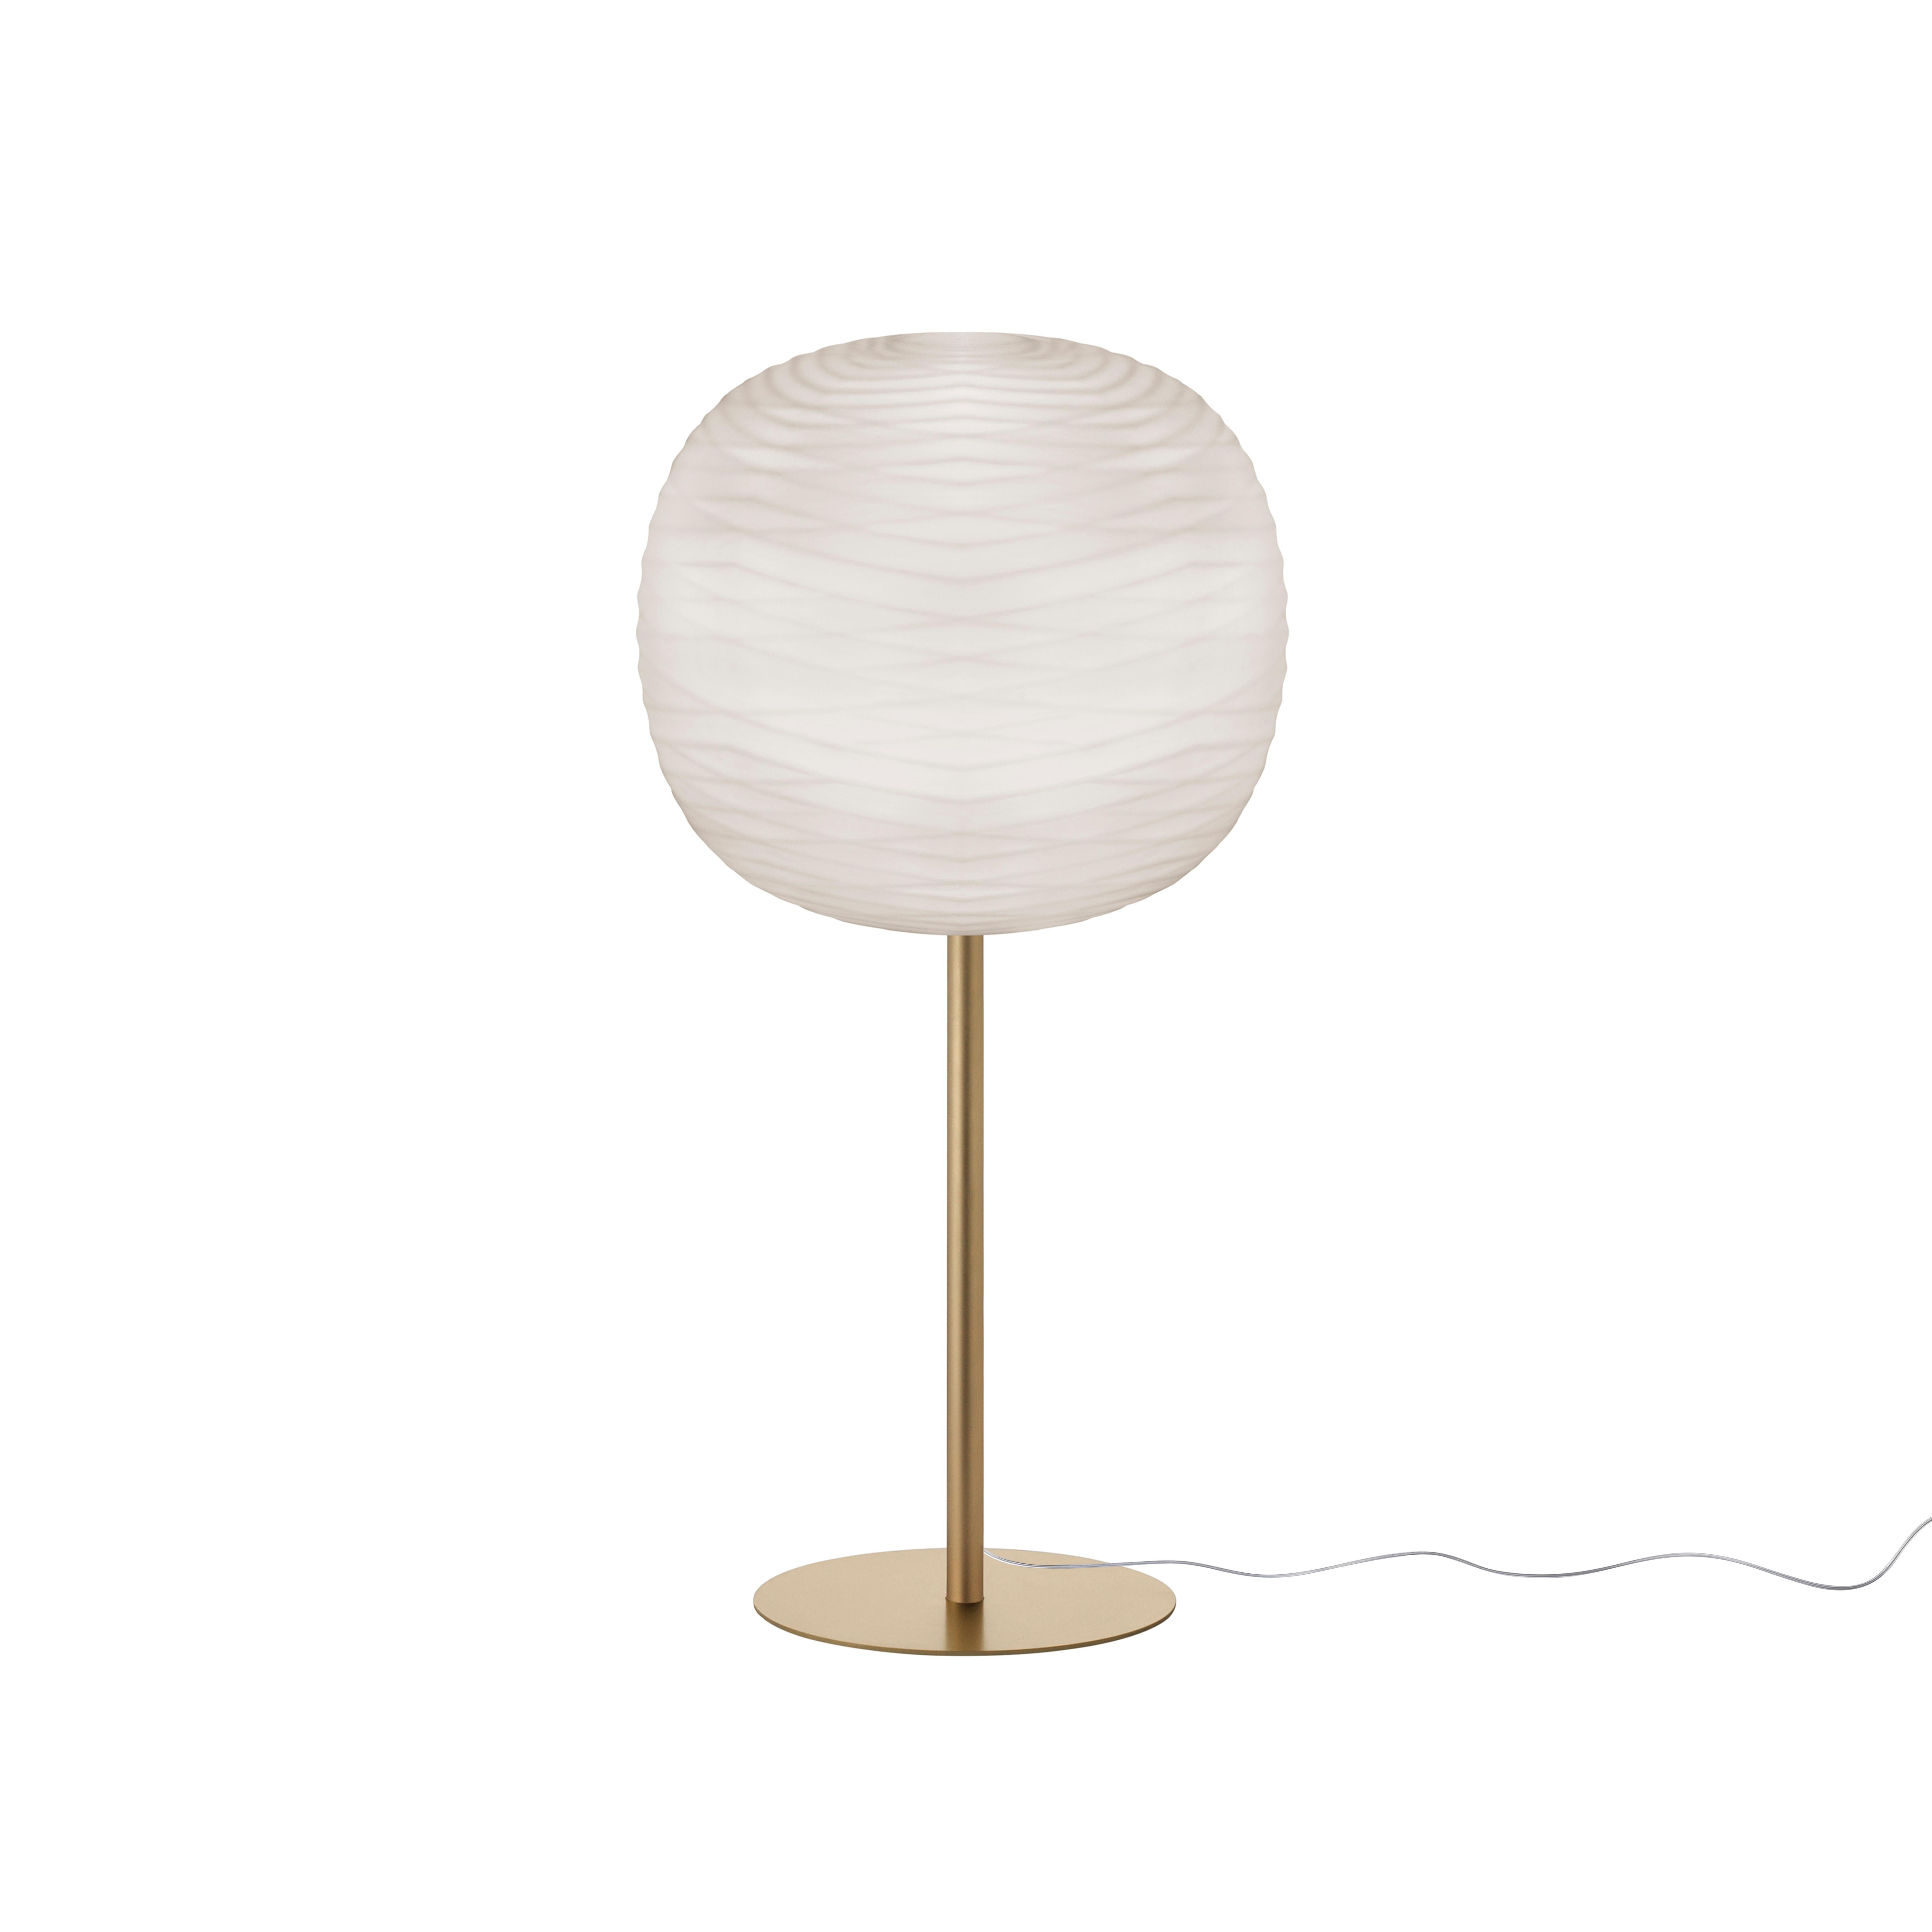 A fluid vibration on glass. The Gem table lamp is a seductive object that declares at first glance the superior value of the material and the fine craftsmanship of its manufacturing process. Unmistakable even when it is switched off, it has a satin